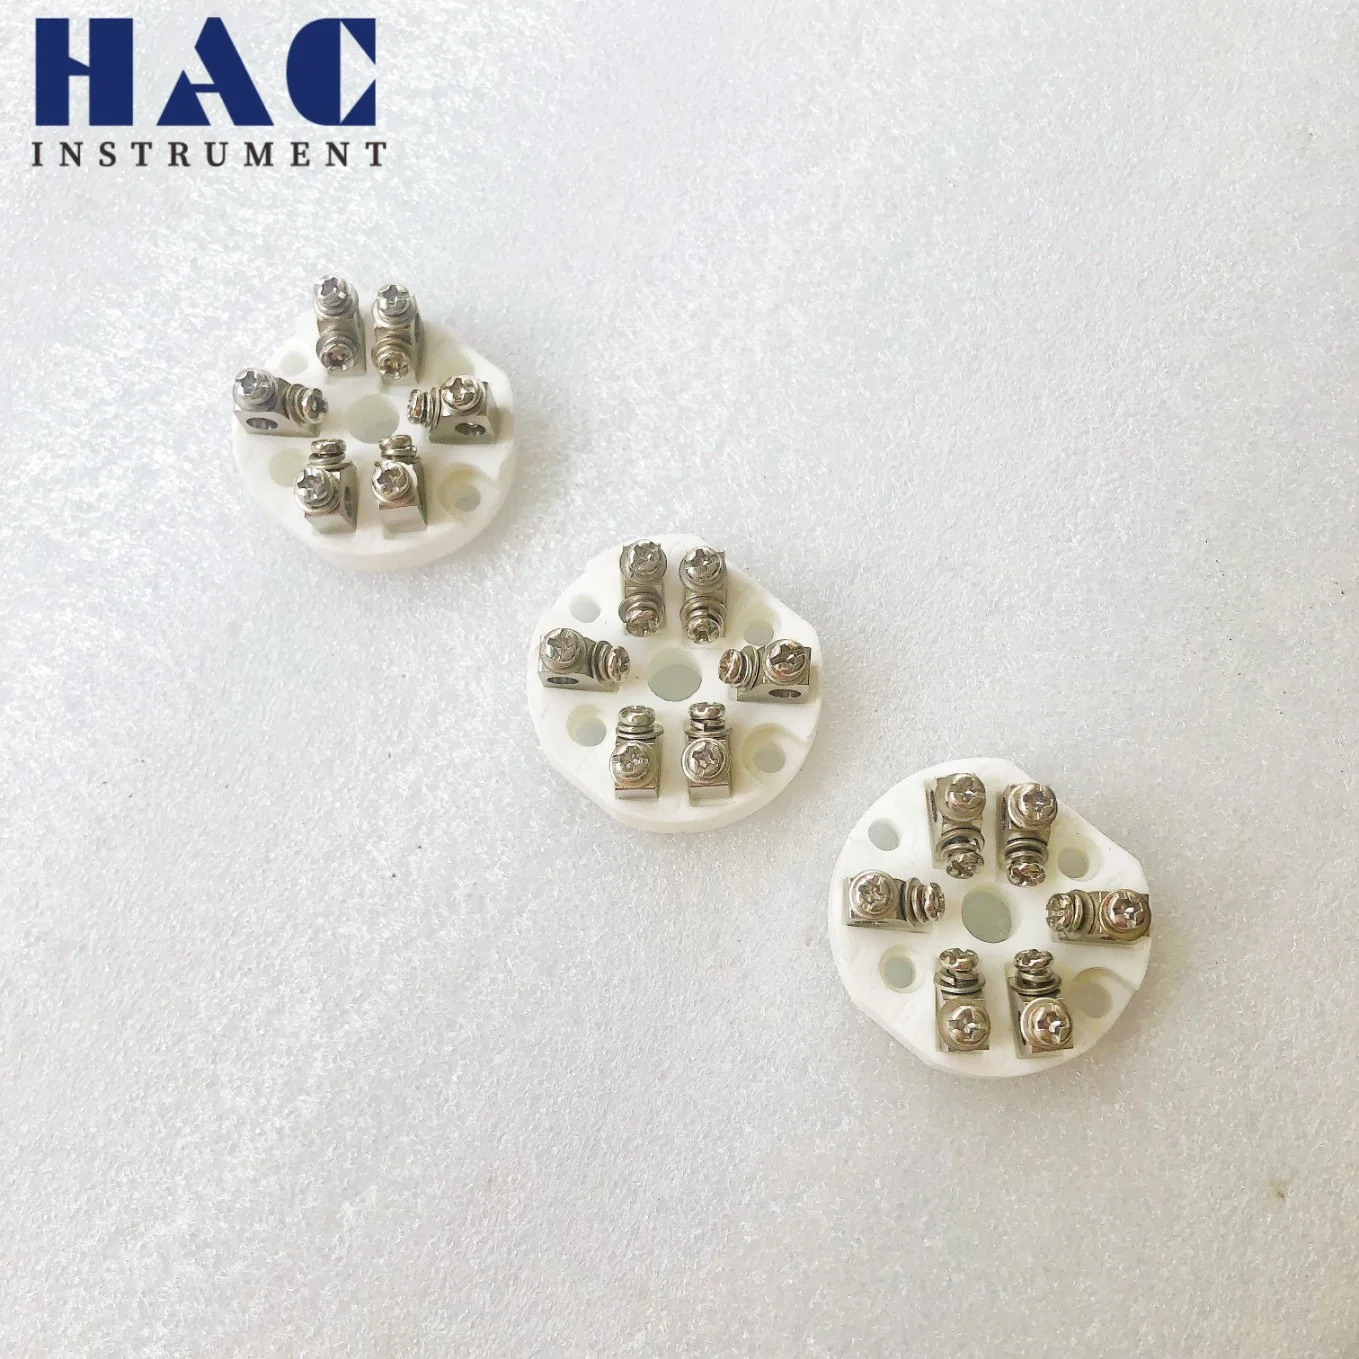 Industrial Thermocouple Components Ceramic Terminal Block